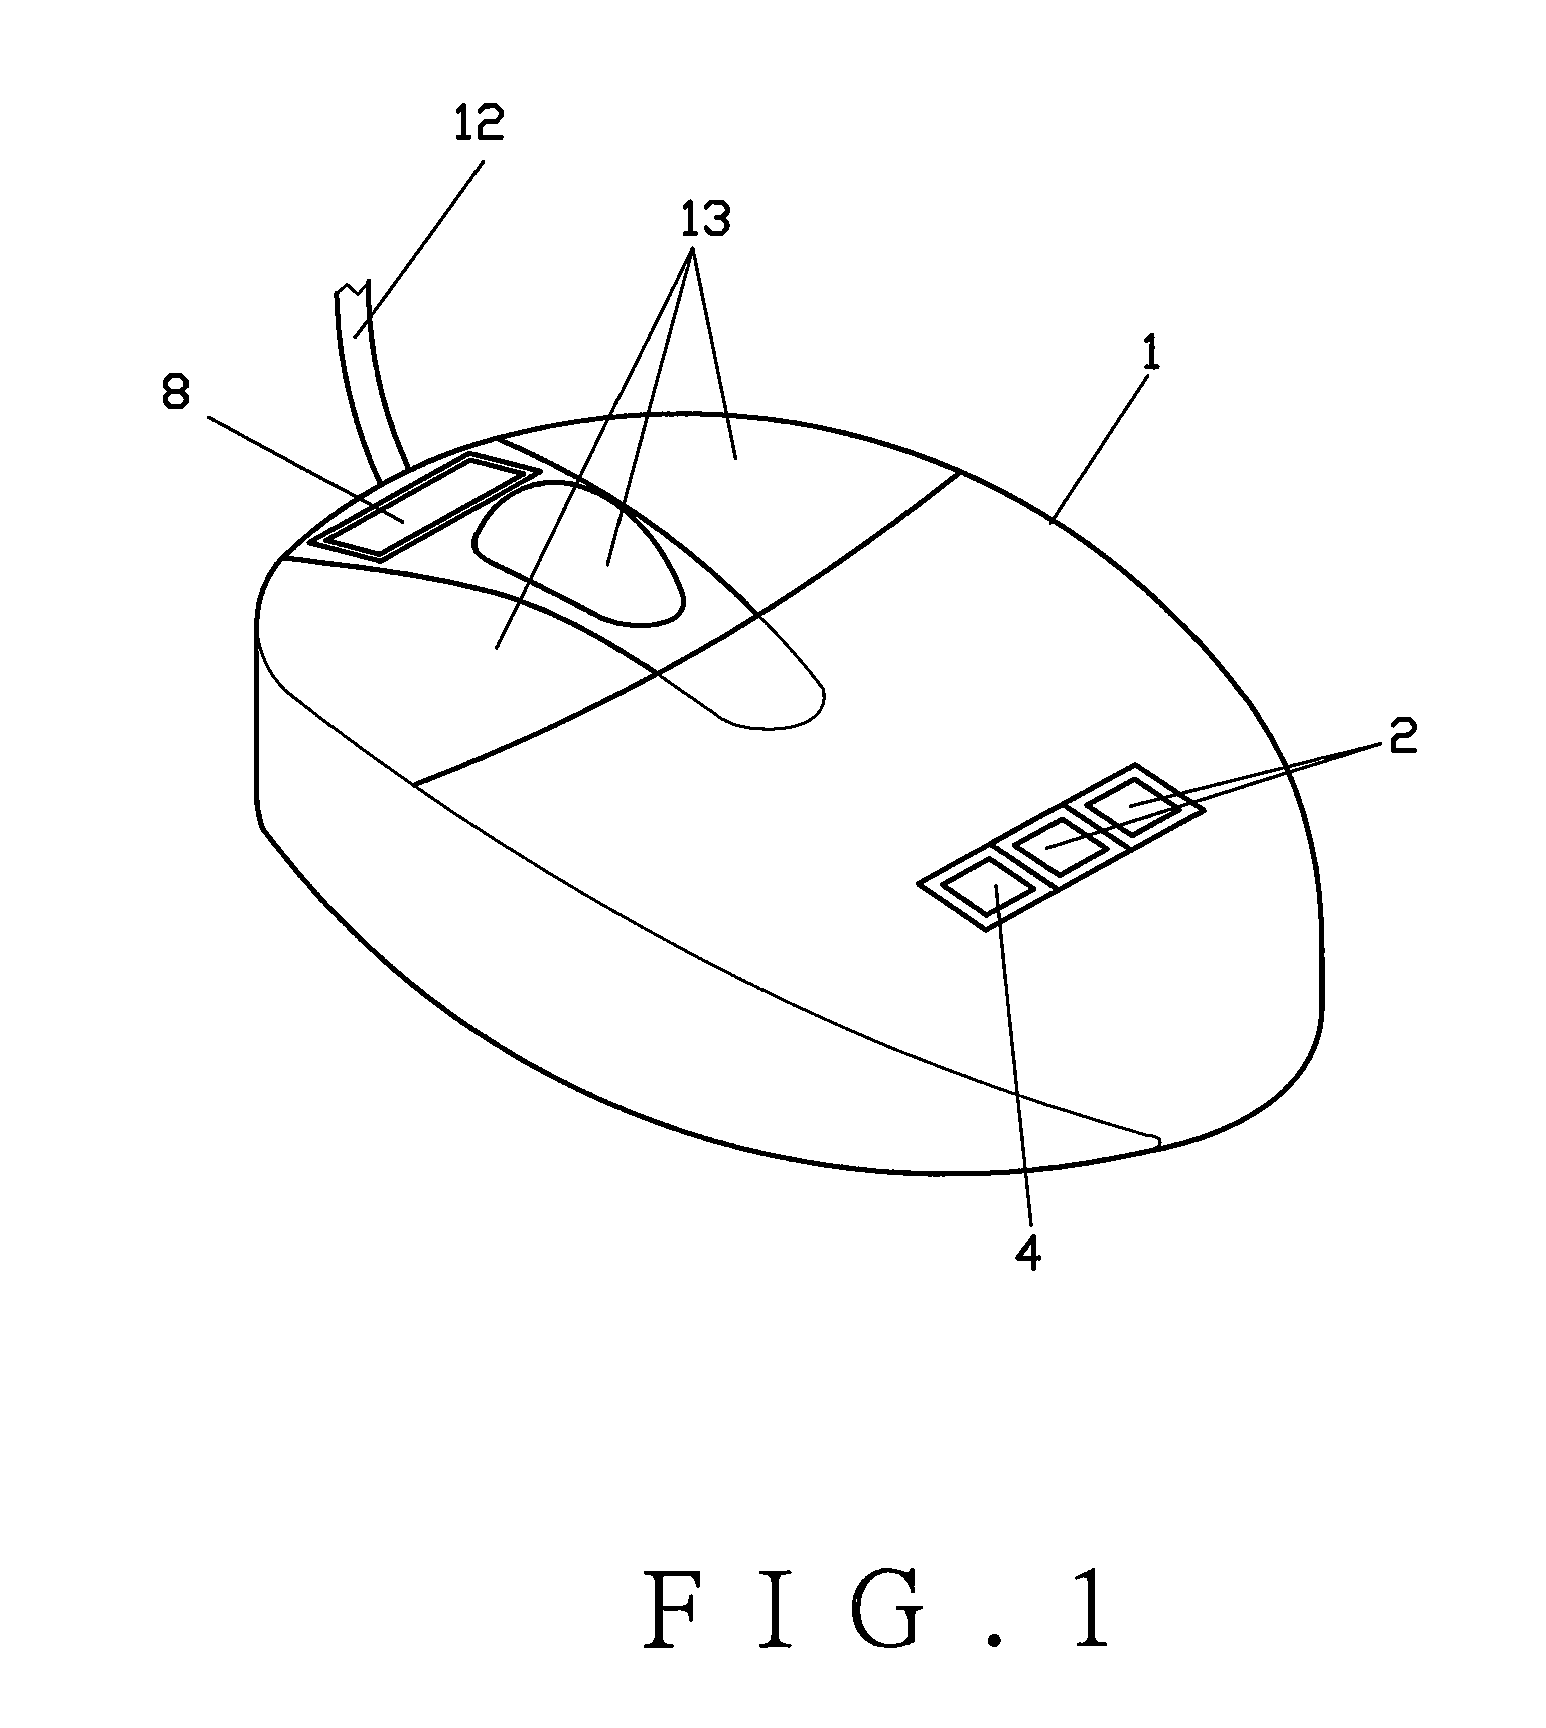 Mouse for measuring consistency of blood oxygen